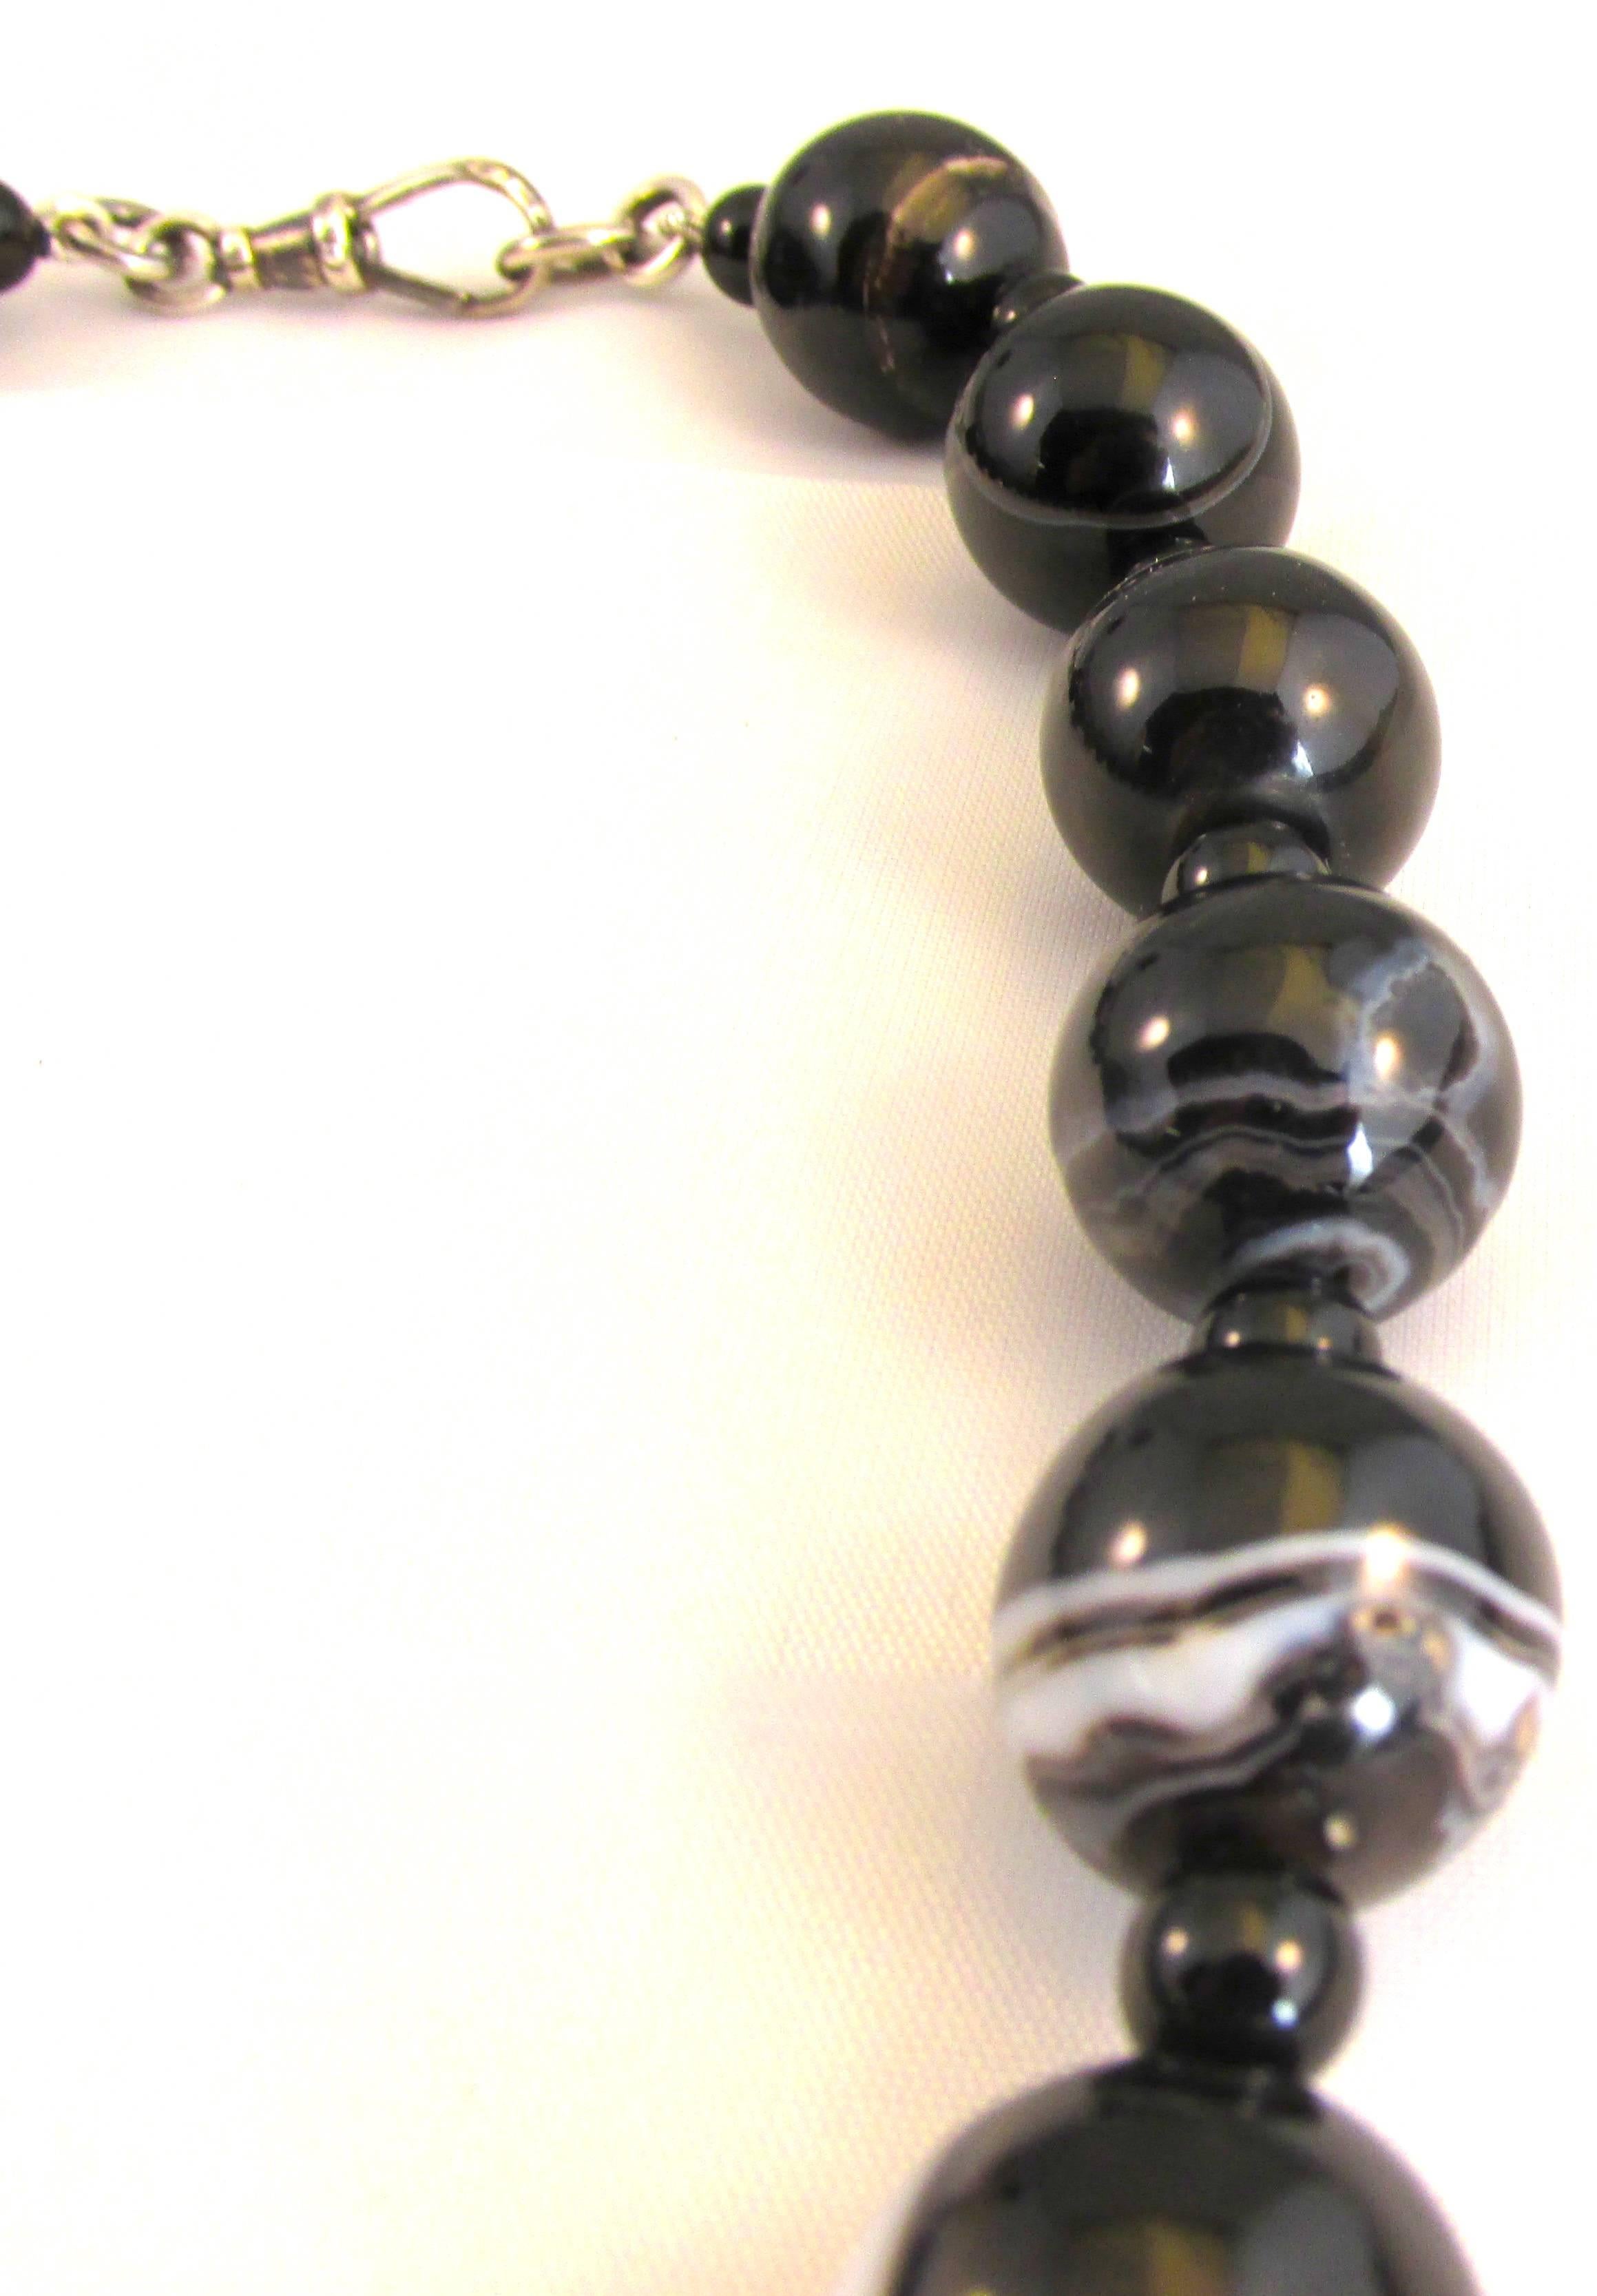 Bold Victorian banded agate bead necklace with a silver dog tag clasp. The 19 large banded agate beads are interspersed with small black agate beads. The necklace measures 17 1/2